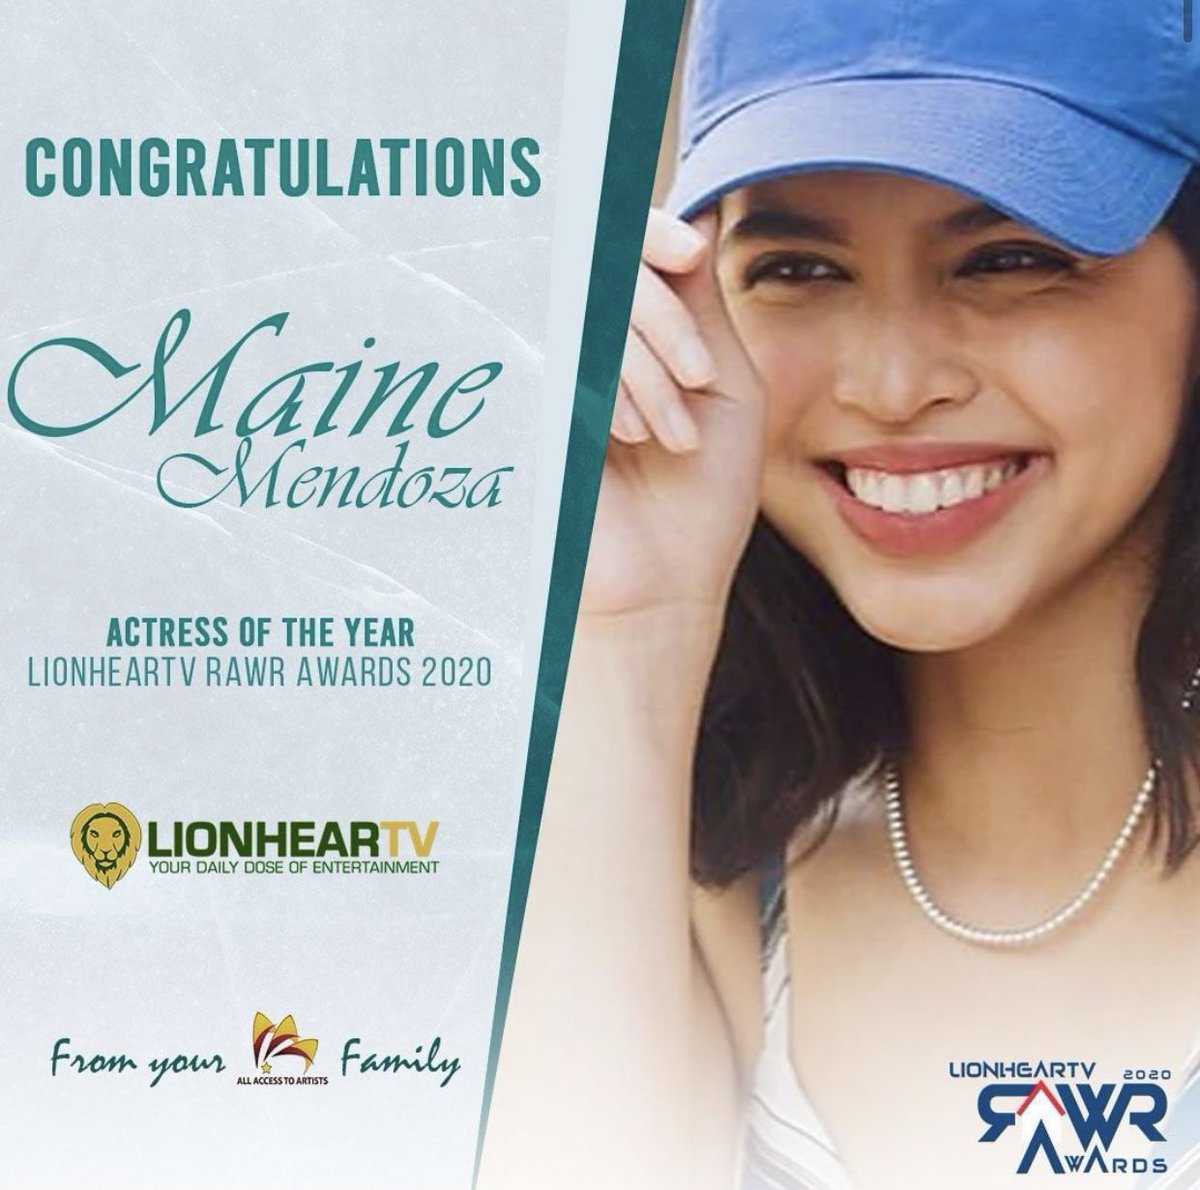 HAPPENED IN ONE DAY!!!! Blessings over blessings!! All glory to You 🙌🏻✨ @mainedcm #RAWRAwards2020 #MaineEdukCircle2020 #MaineMendoza #DADDYSGURLMissingTicket